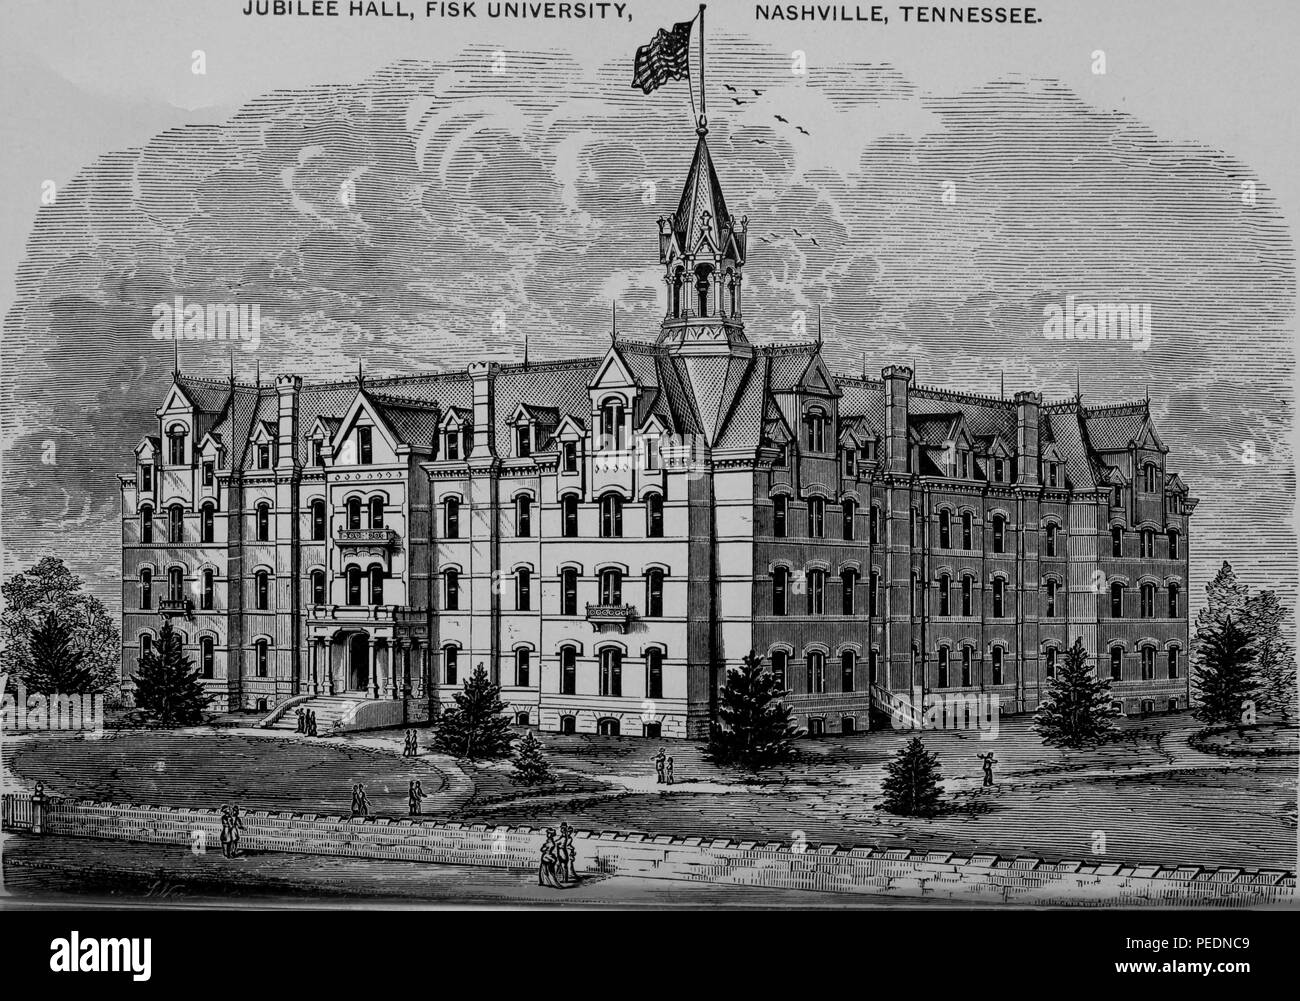 Black and white print of Fisk University's Jubilee Hall, a large Gothic Revival building, with a central tower surmounted by an American flag, and with pedestrians in Victorian dress in the foreground, located in Nashville Tennessee, 1880. Courtesy Internet Archive. () Stock Photo